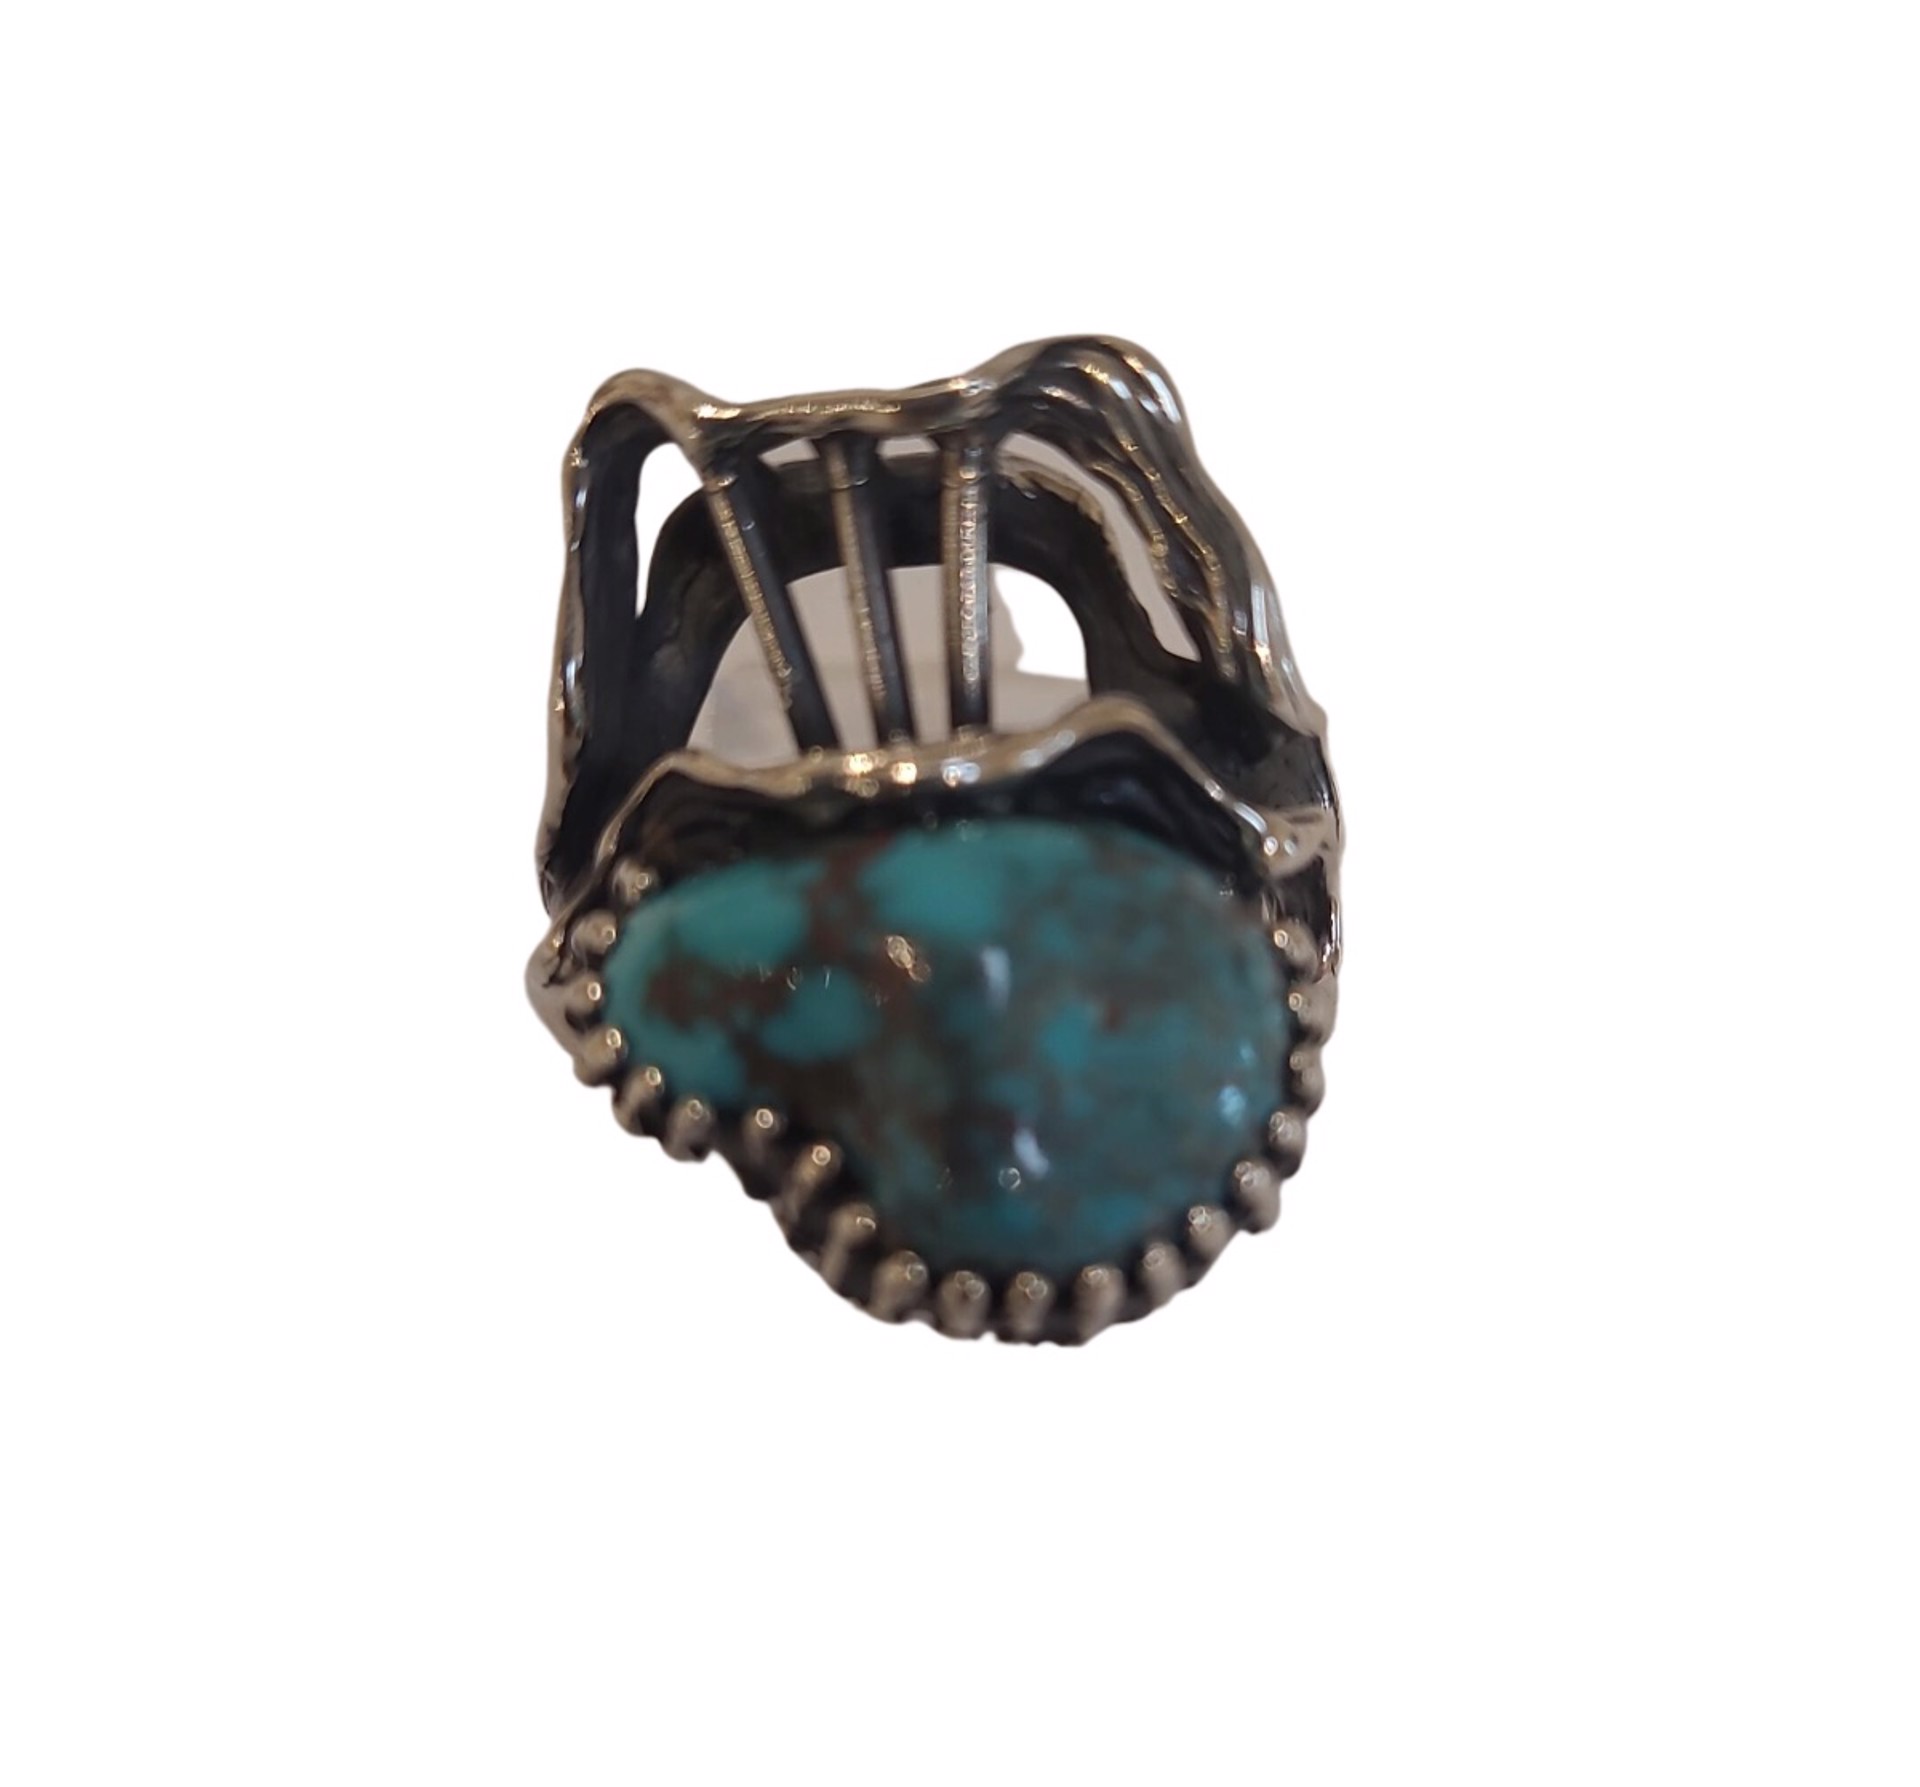 Ring Sterling Silver with Bisbee Turquoise Size 7 BKN 511 by Ken and Barbara Newman